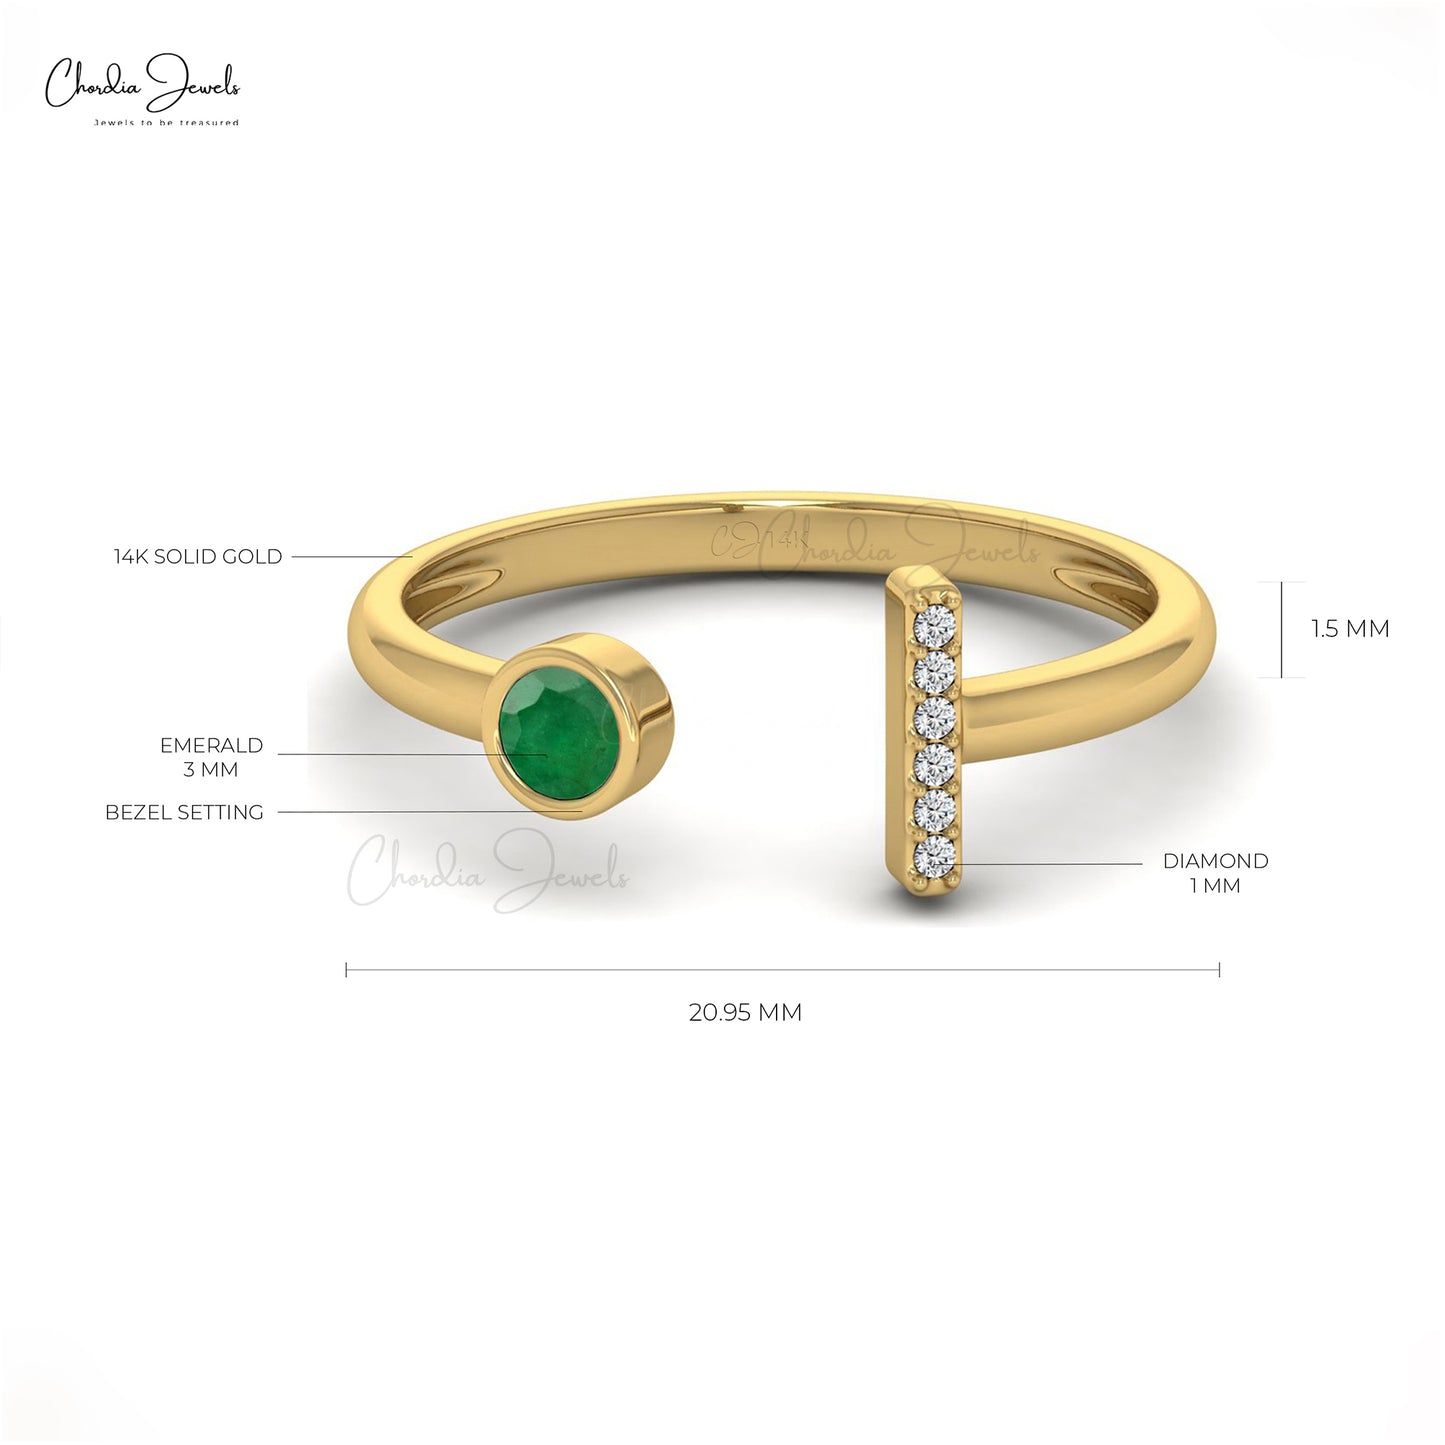 Step into the spotlight with the charm of emerald split shank ring.